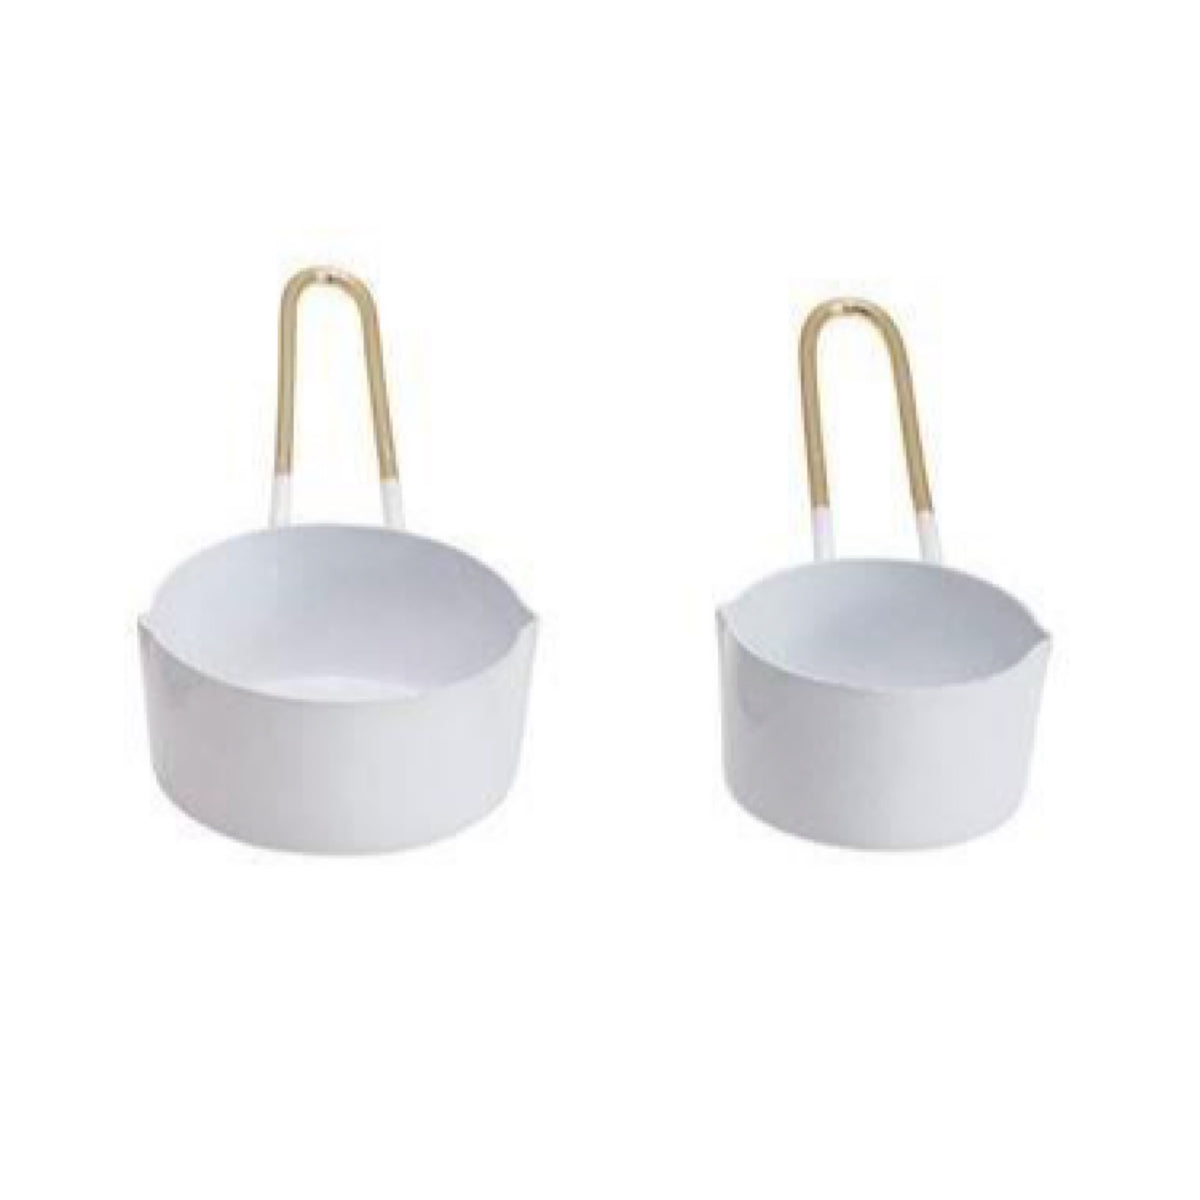 Enamelled Measuring Cups in White